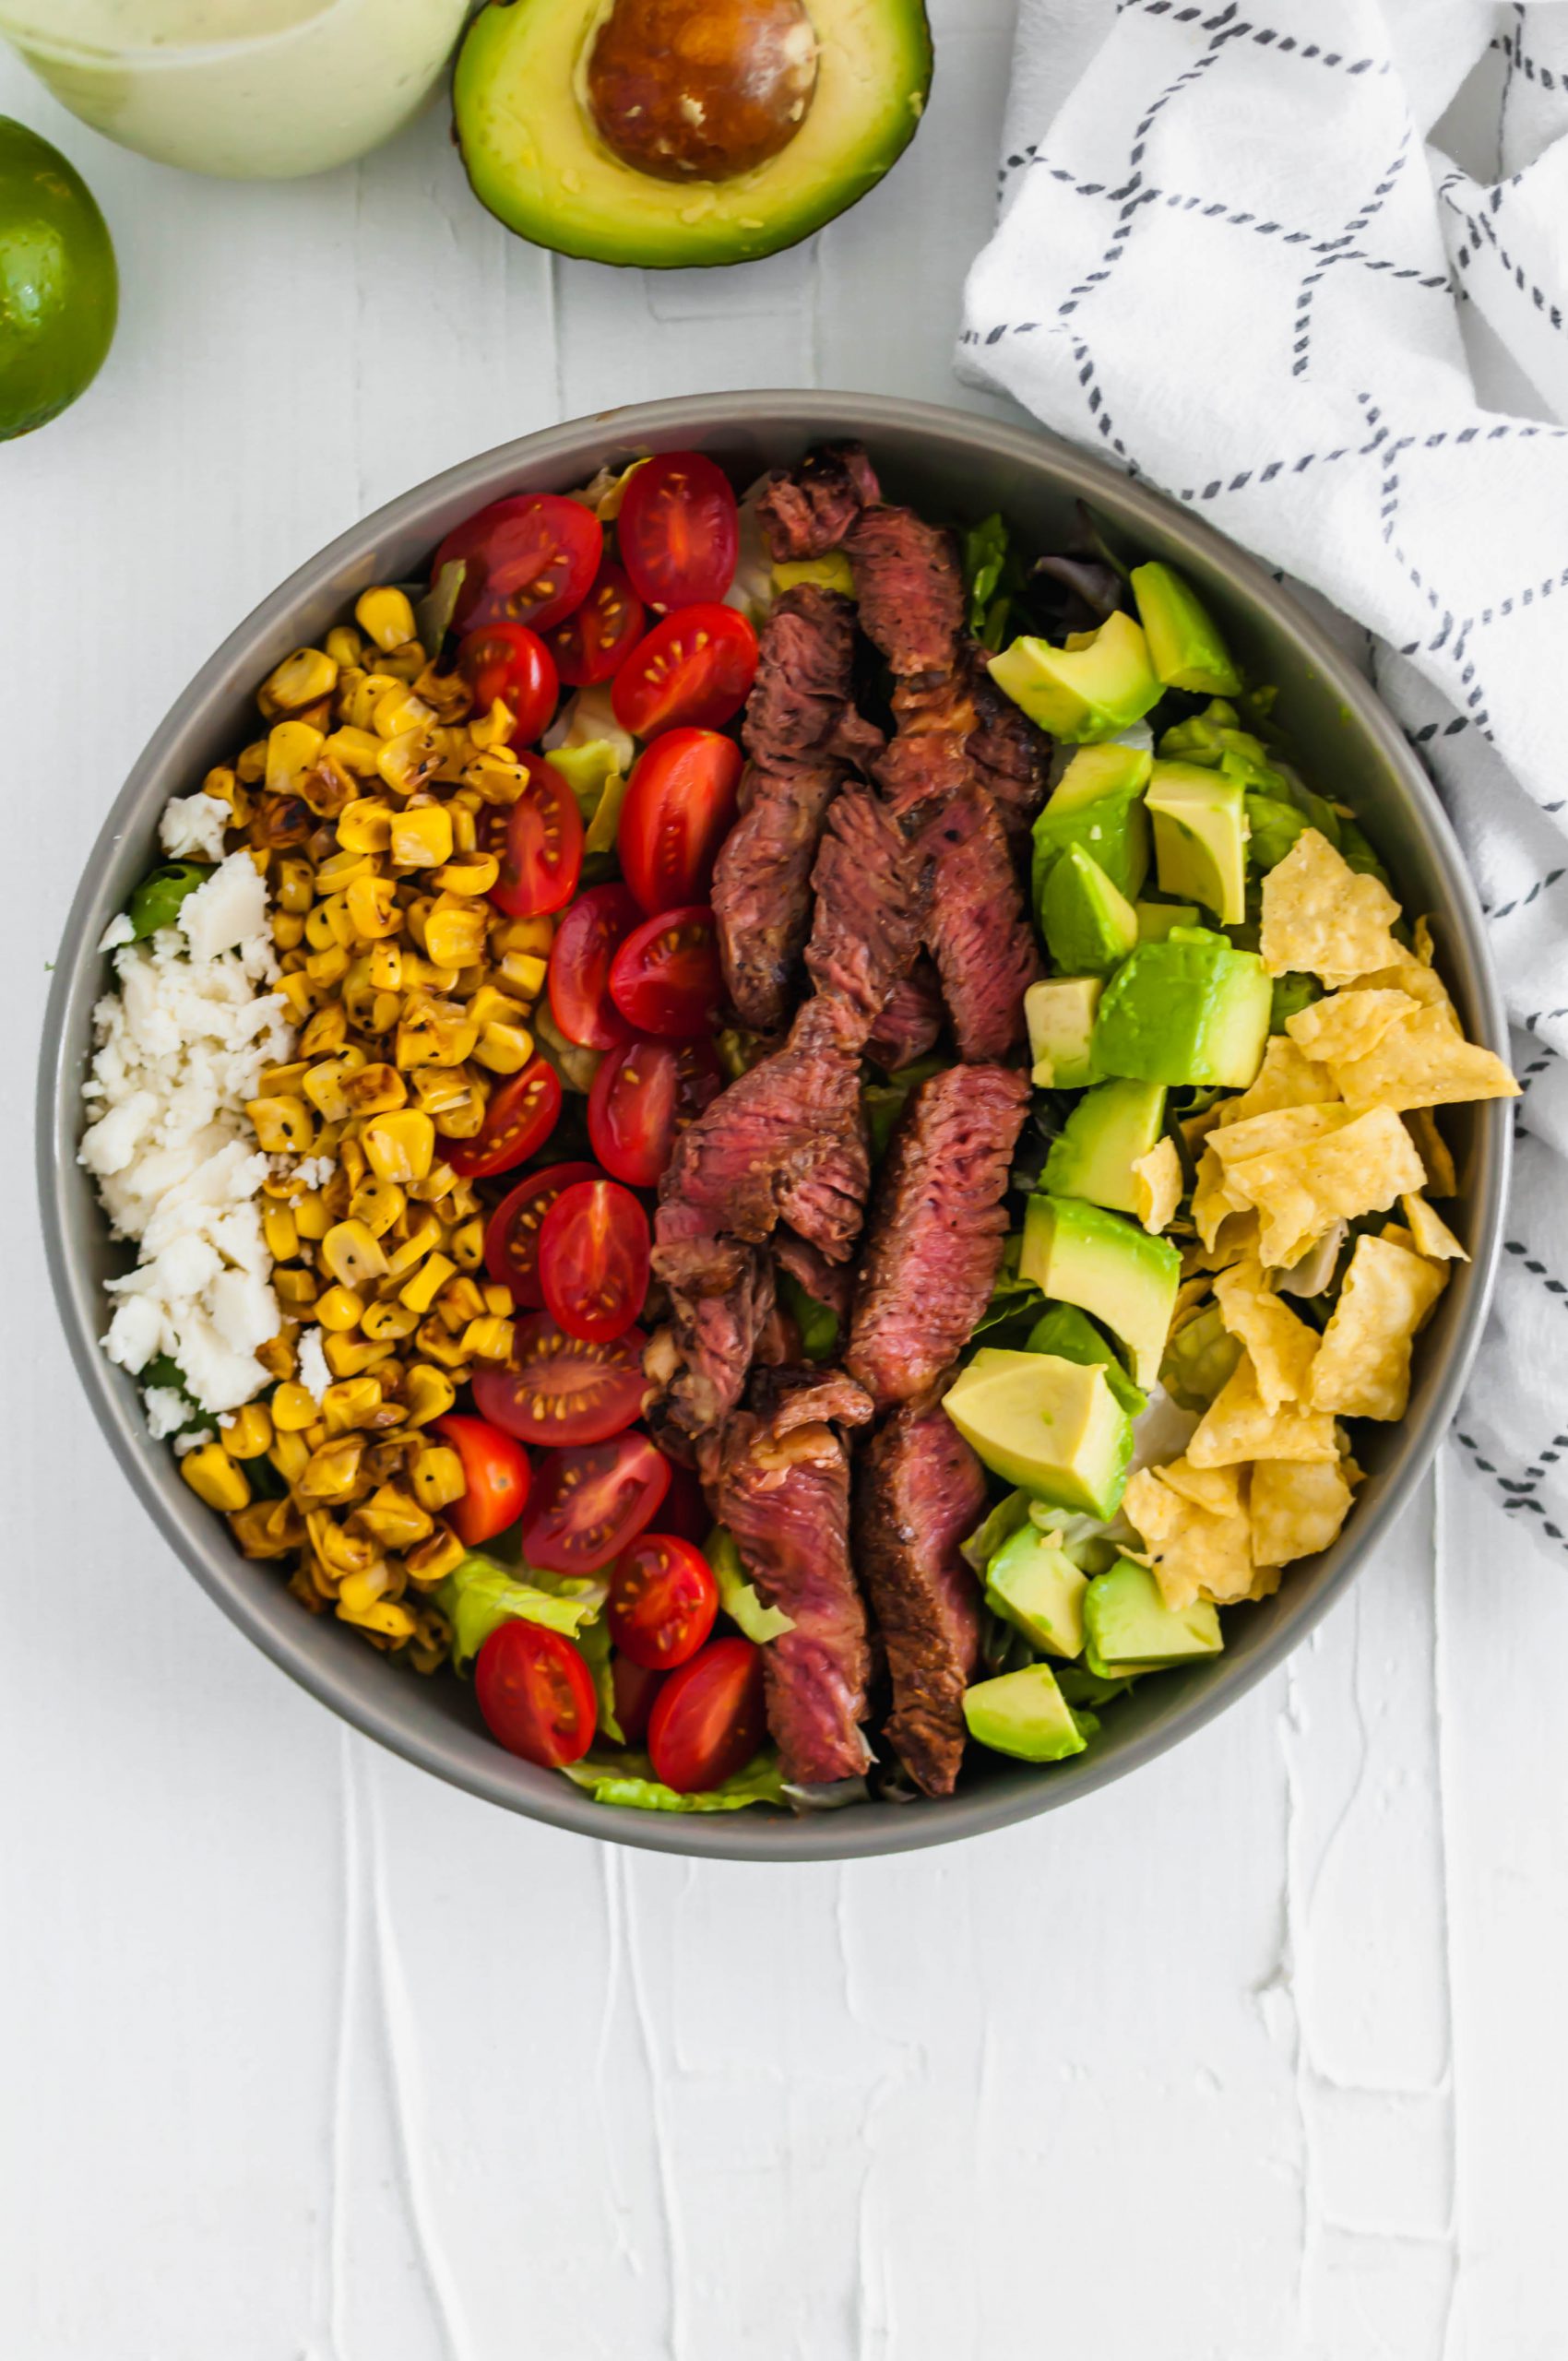 This Southwest Steak Salad is the ultimate summer salad. Packed with grilled steak, charred corn, avocado, crumbled queso fresco, tomatoes and crushed tortilla chips.